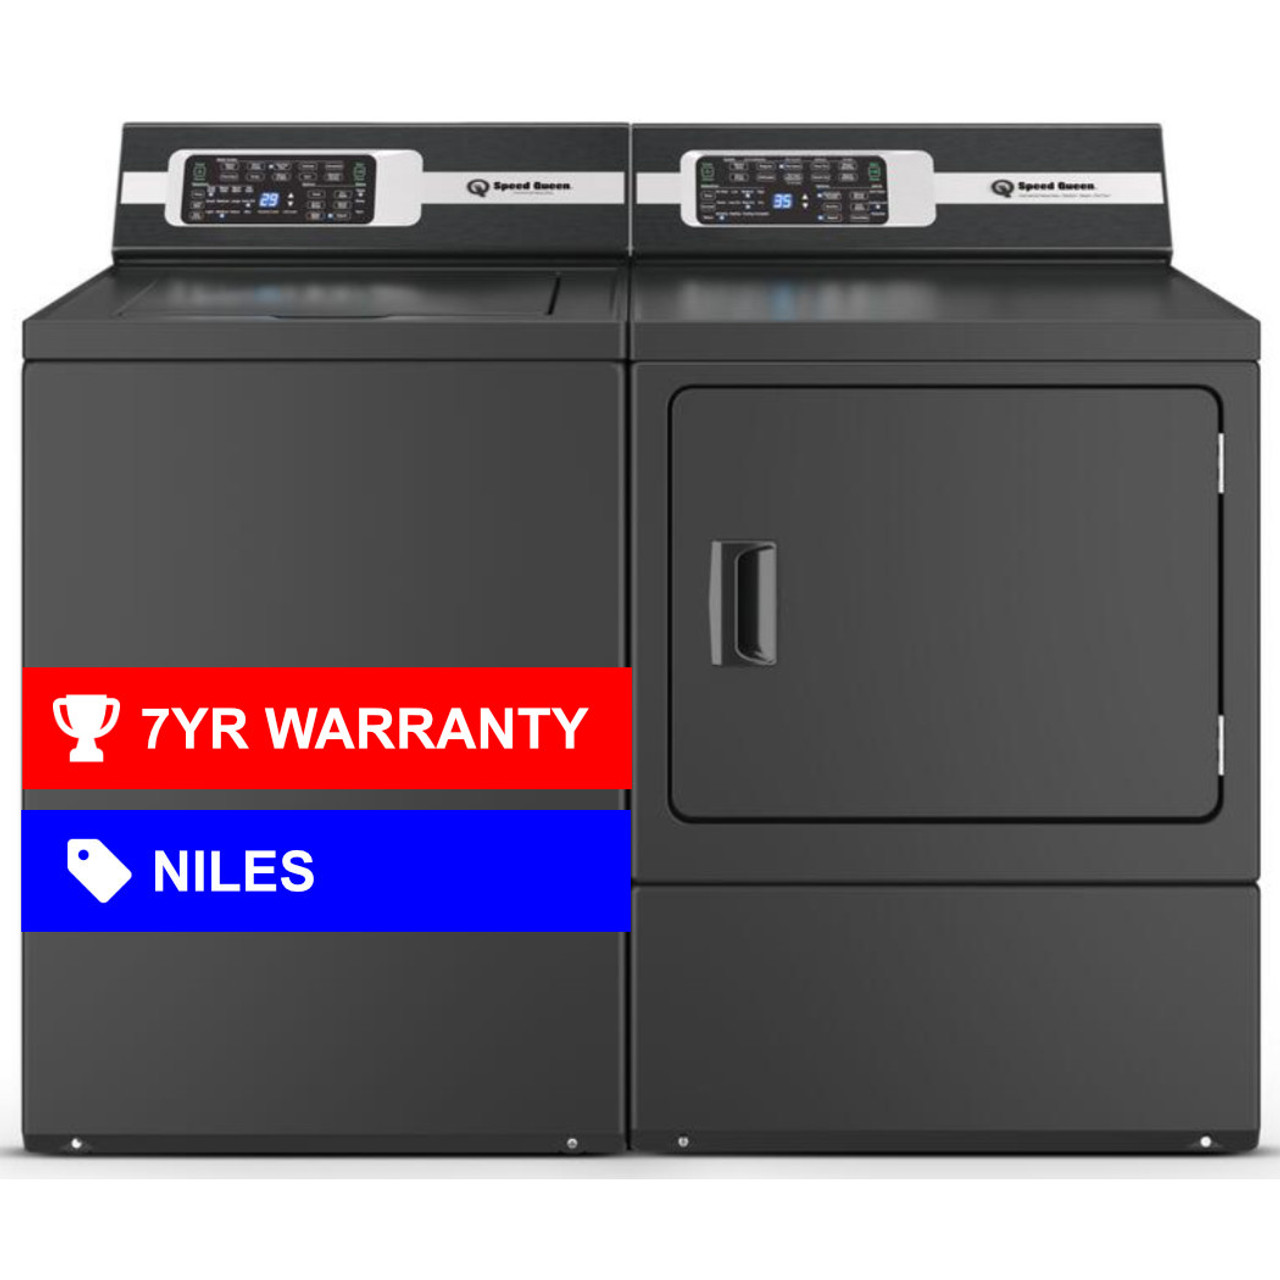 Speed Queen® TR7 3.2 Cu. Ft. Black Top Load Washer & 7.0 Cu. Ft. Gas Dryer  with 7 Year Warranty TR7003BN / DR7004BG